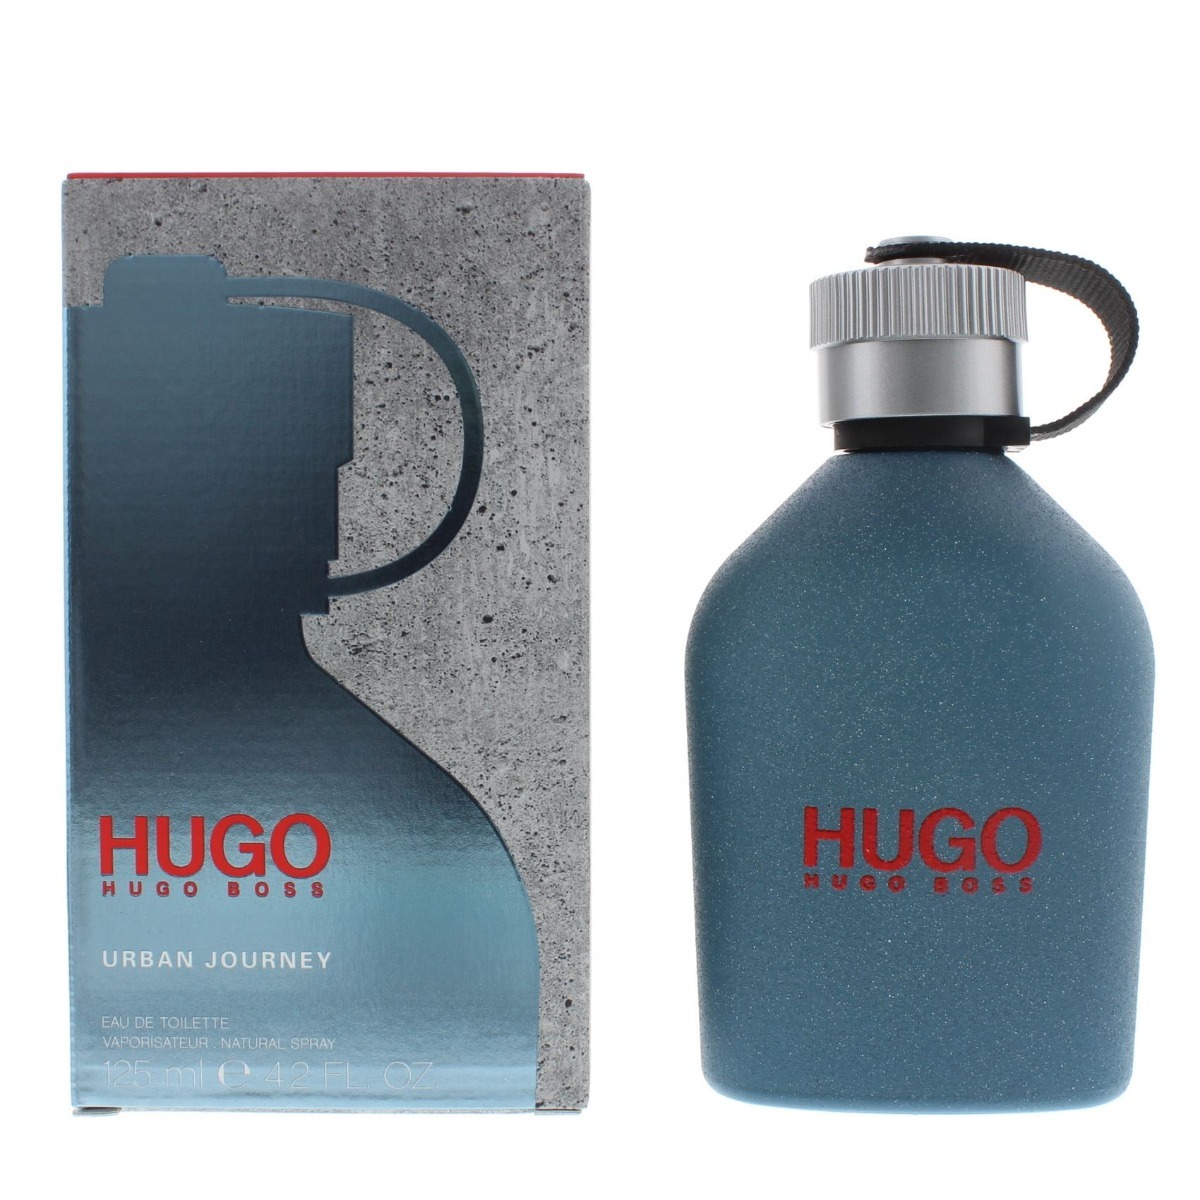 urban journey hugo boss Cheaper Than Retail Price\u003e Buy Clothing,  Accessories and lifestyle products for women \u0026 men -